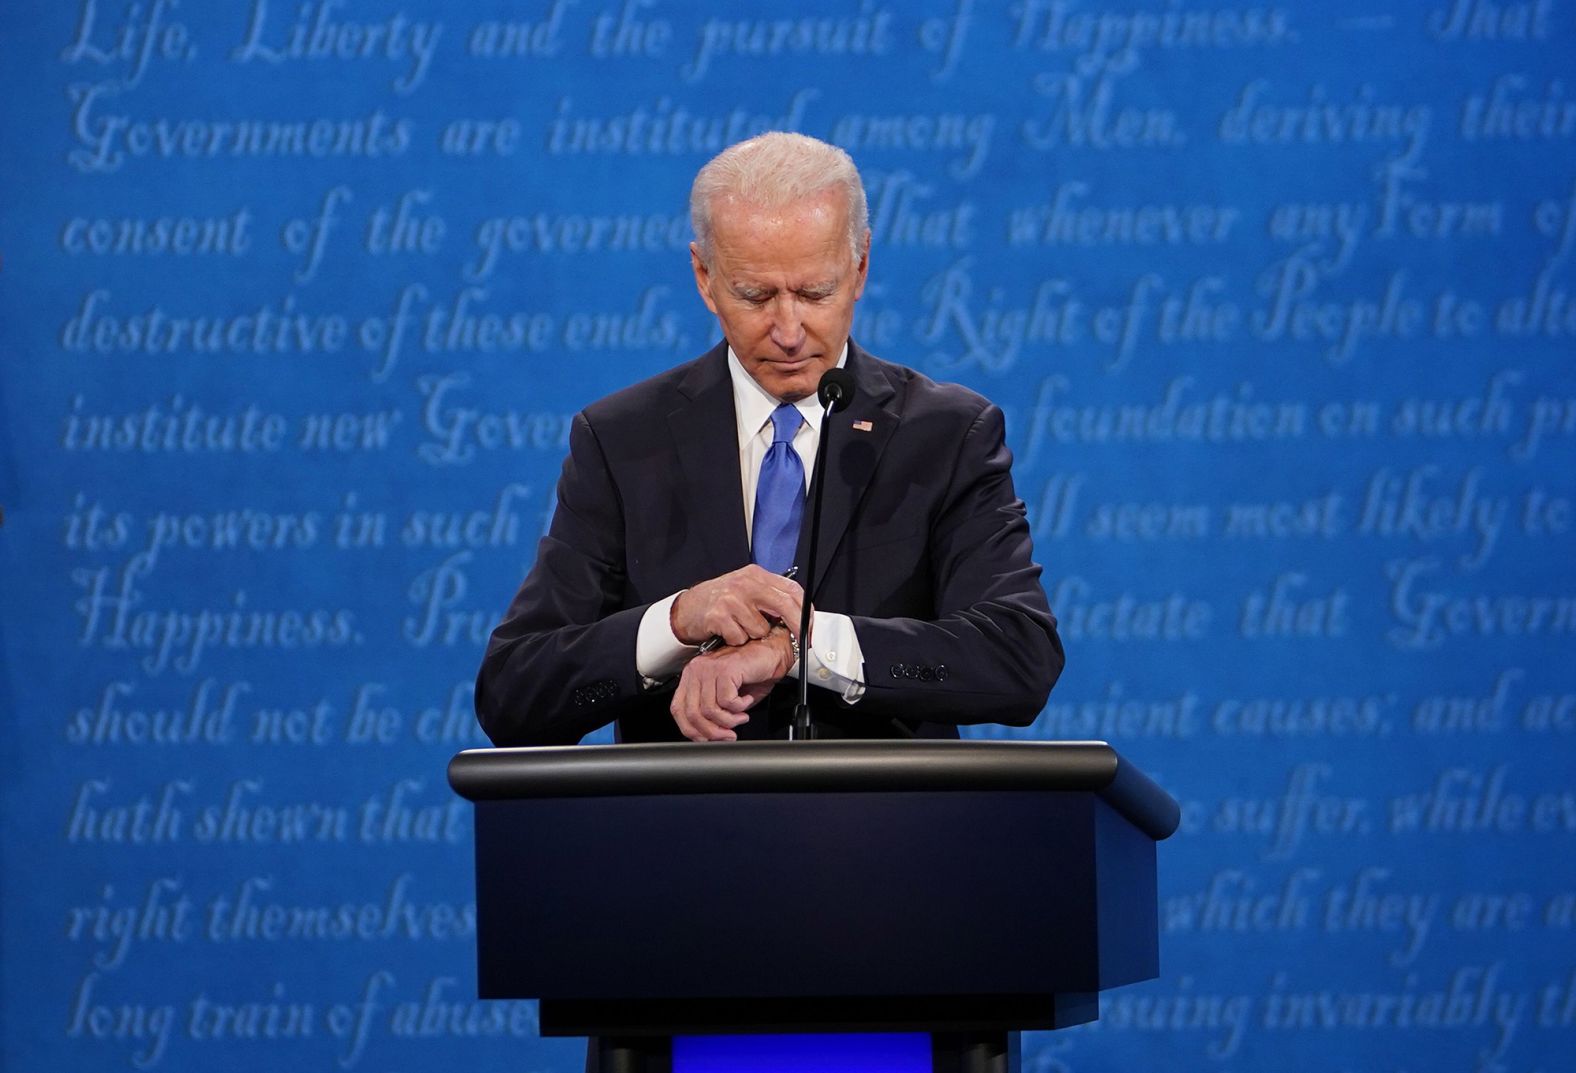 Biden looks at his watch during the debate. It lasted a little over 90 minutes.